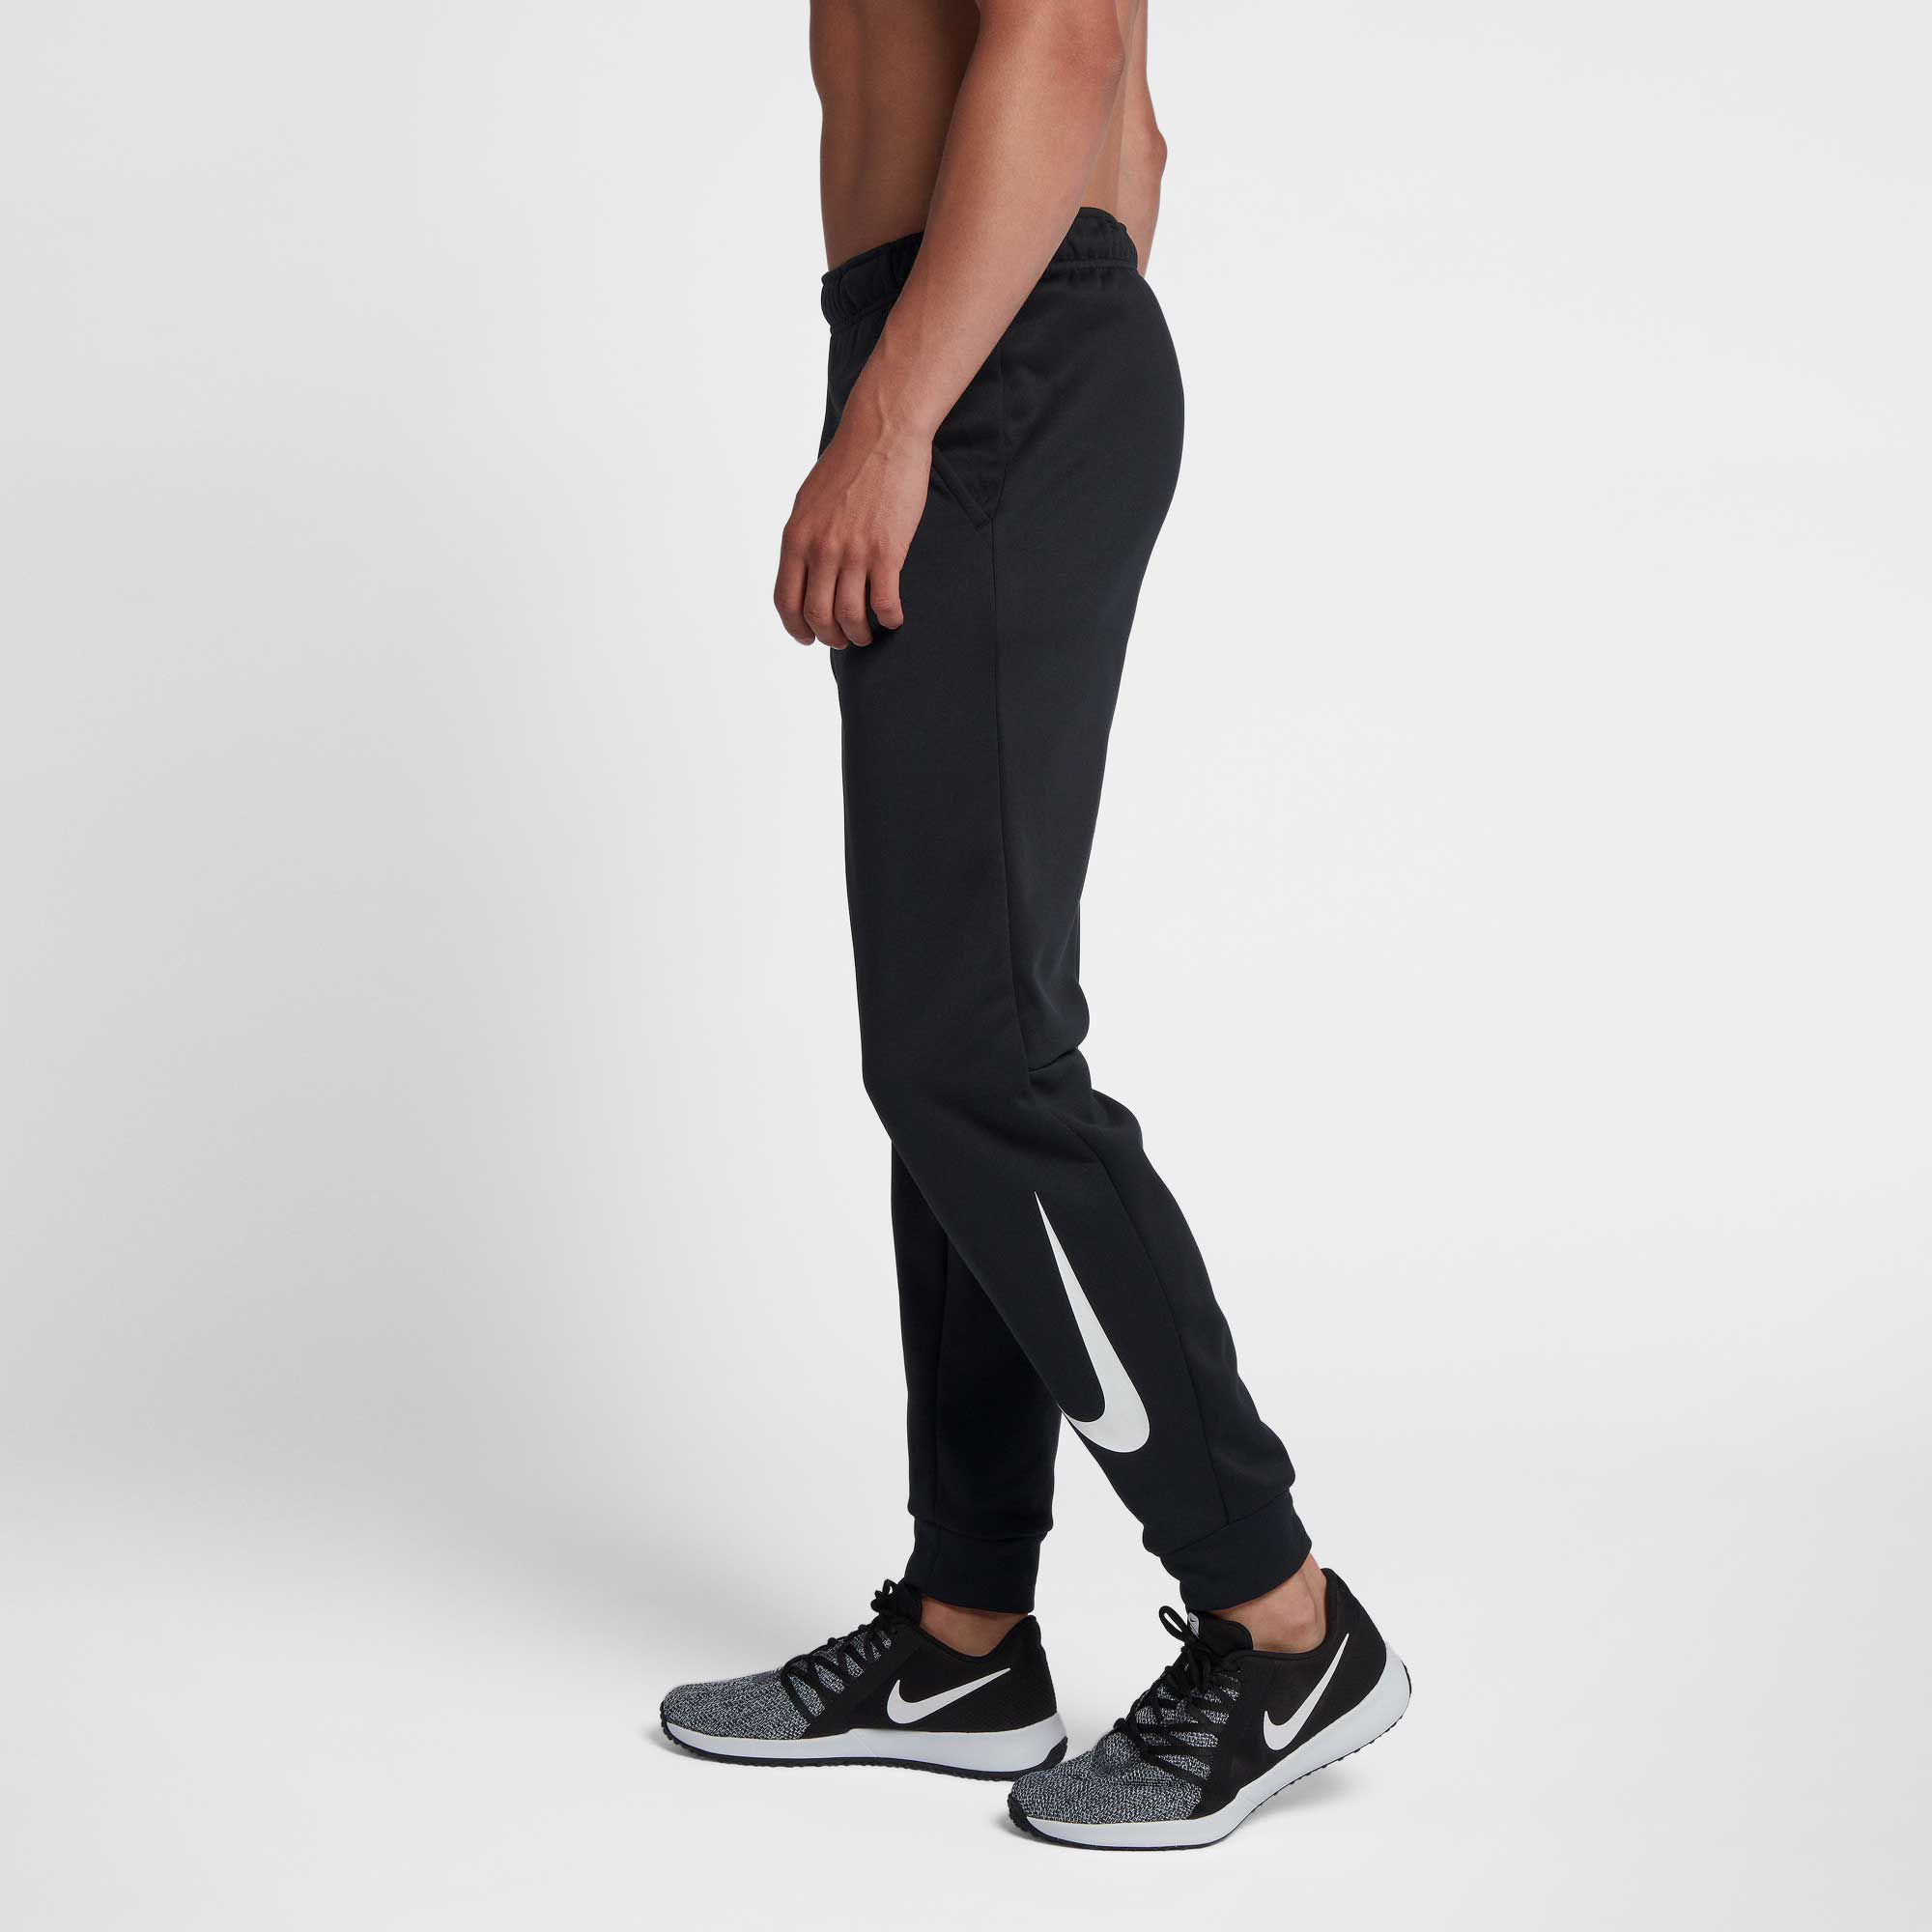 nike tapered therma pants